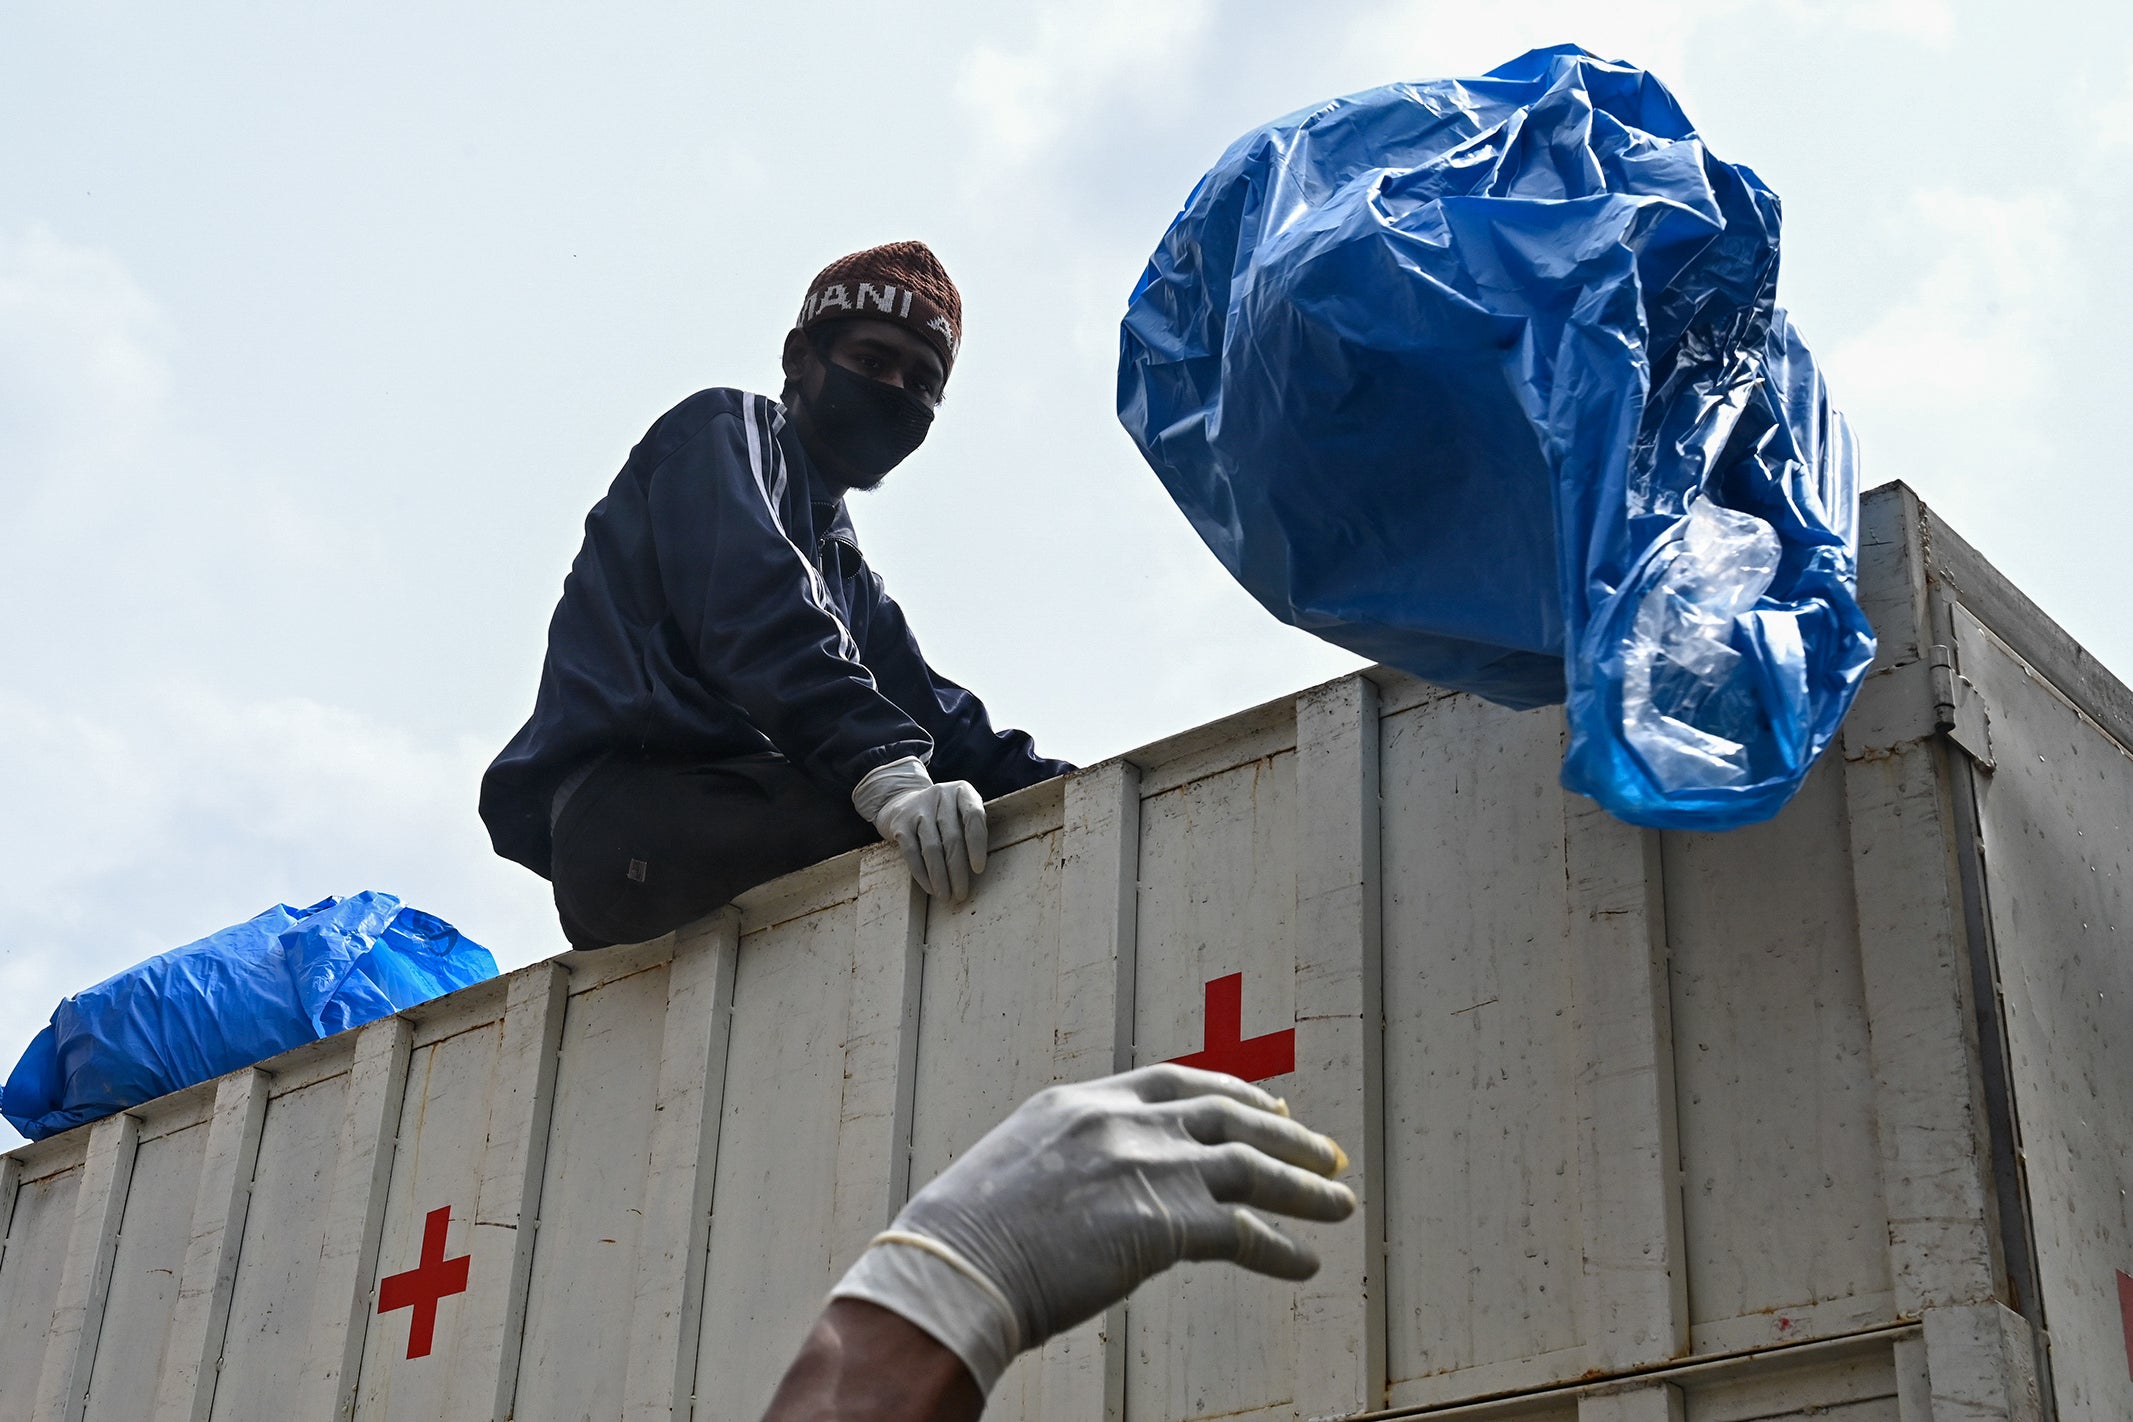 File: Workers dispose off waste at a hospital during a government-imposed nationwide lockdown as a preventive measure against the coronavirus infection in Srinagar, India